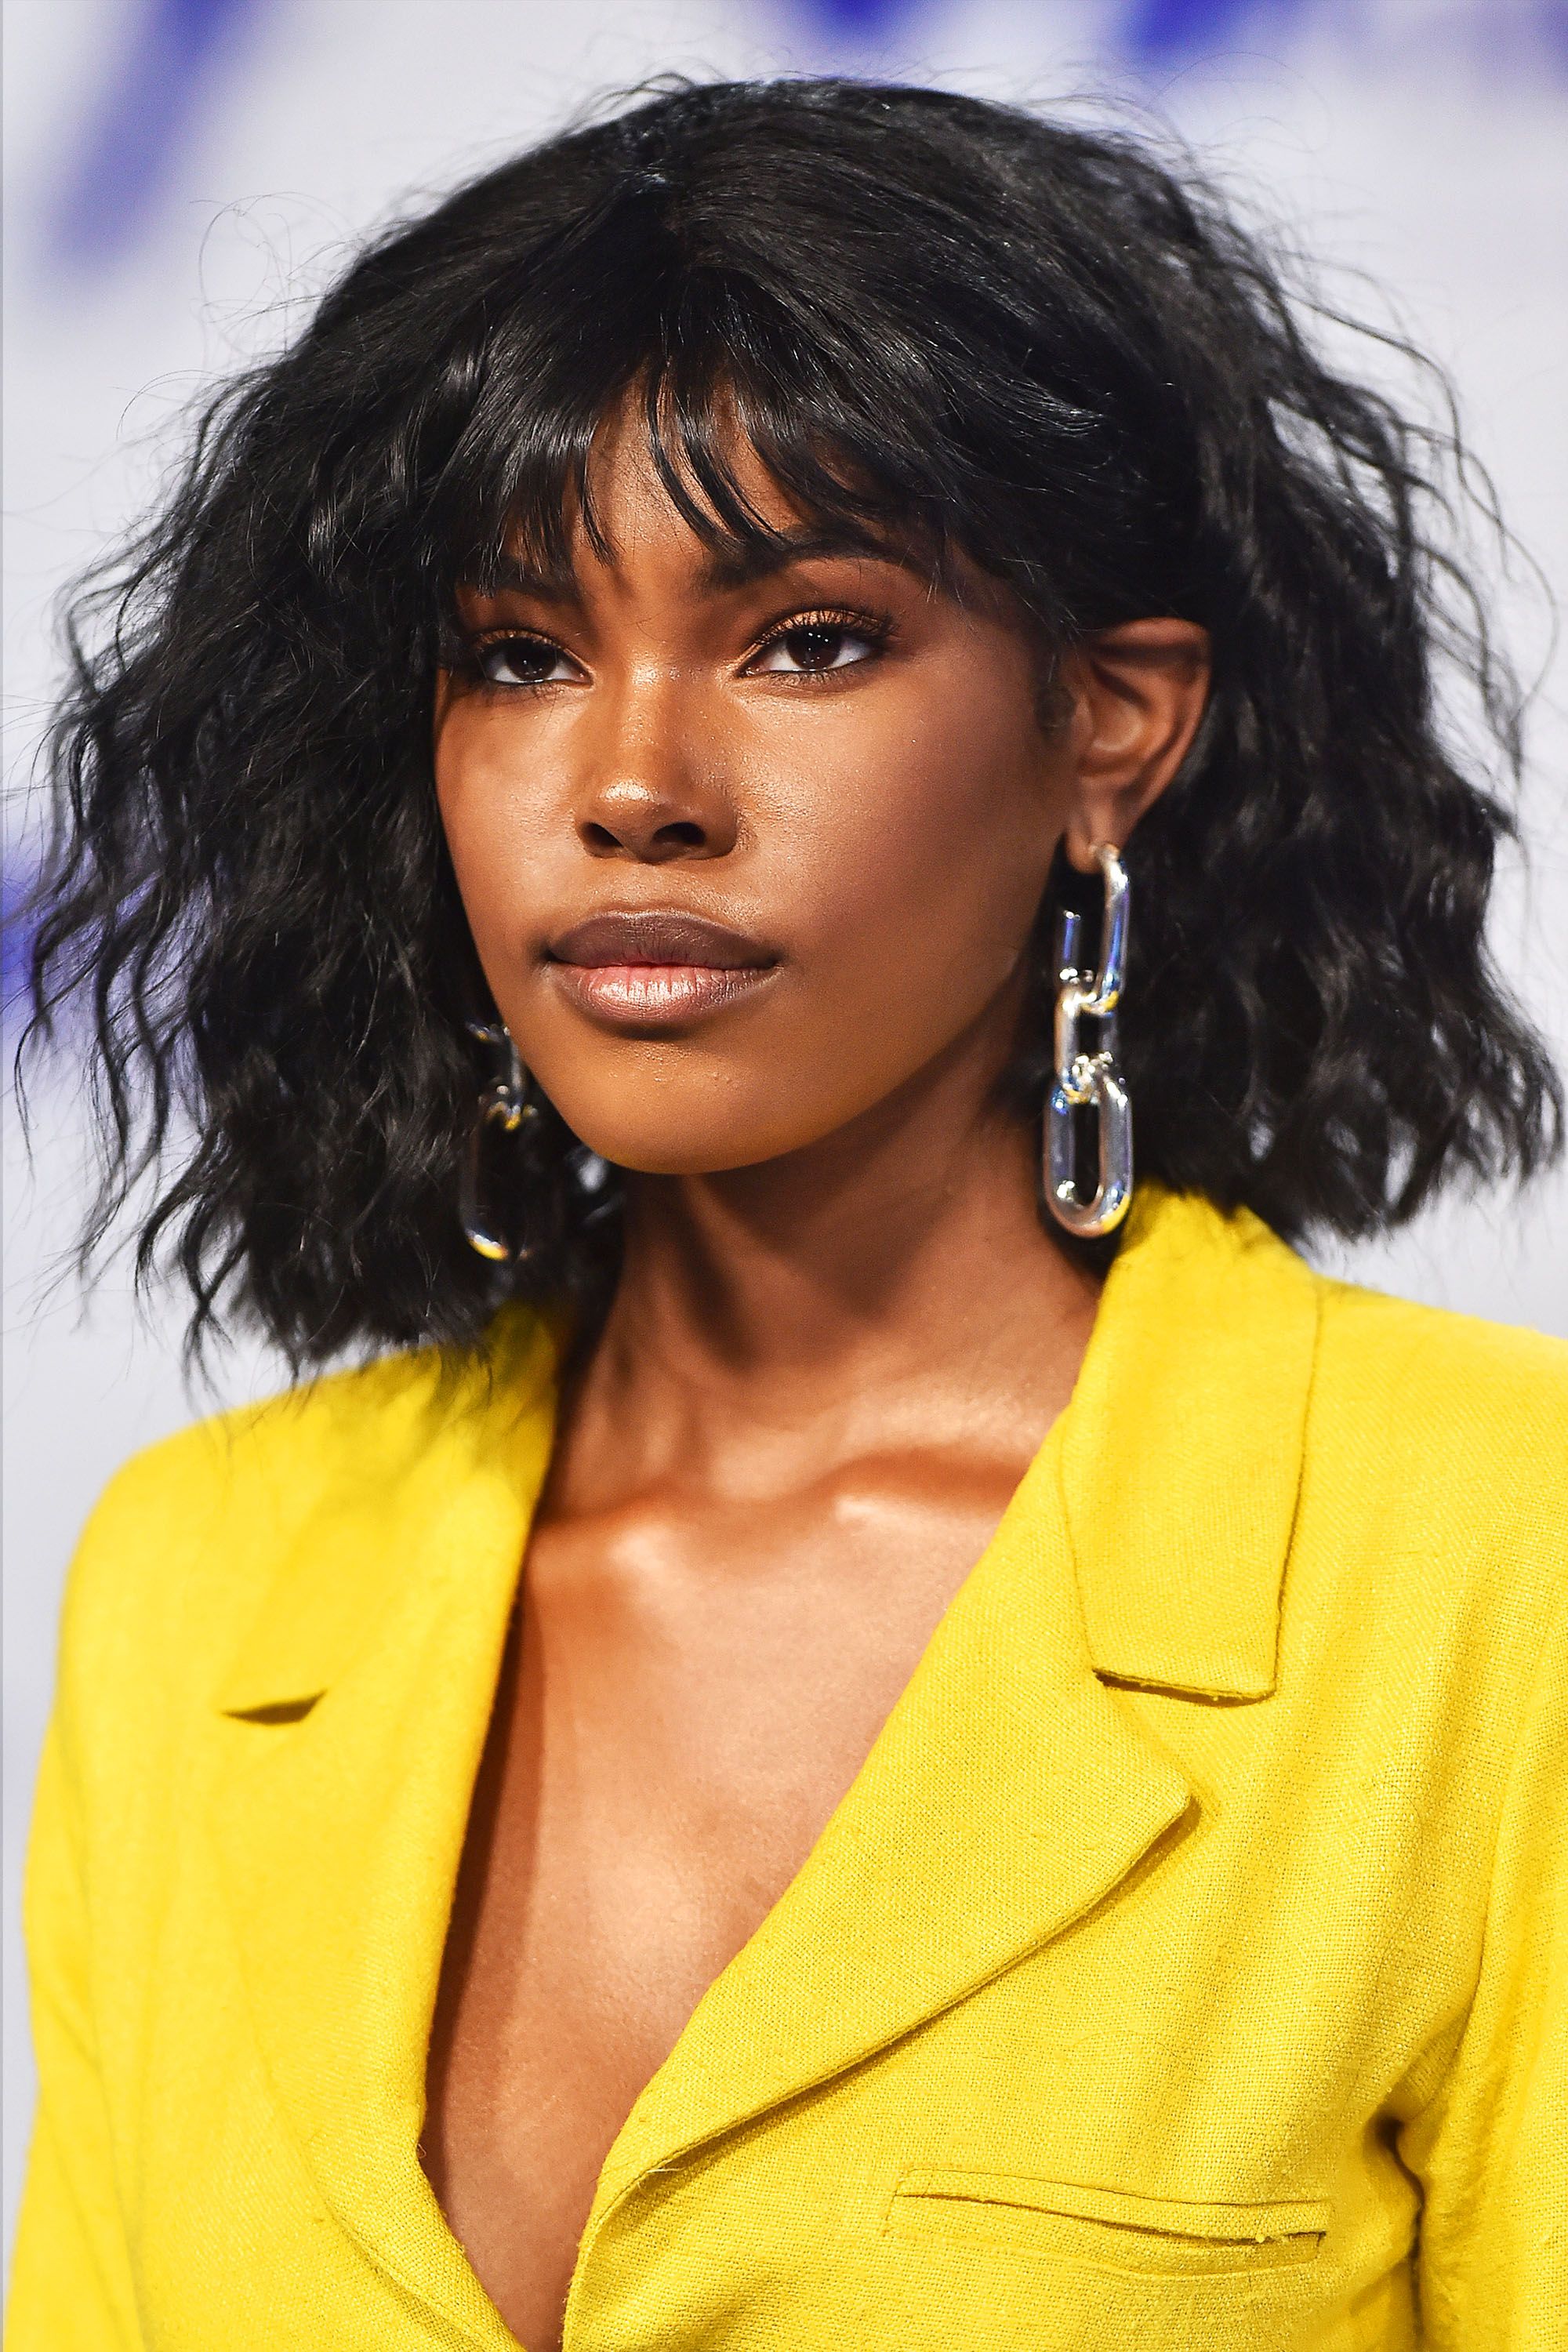 91 Best Ways to Pair Curly Hair with Bangs